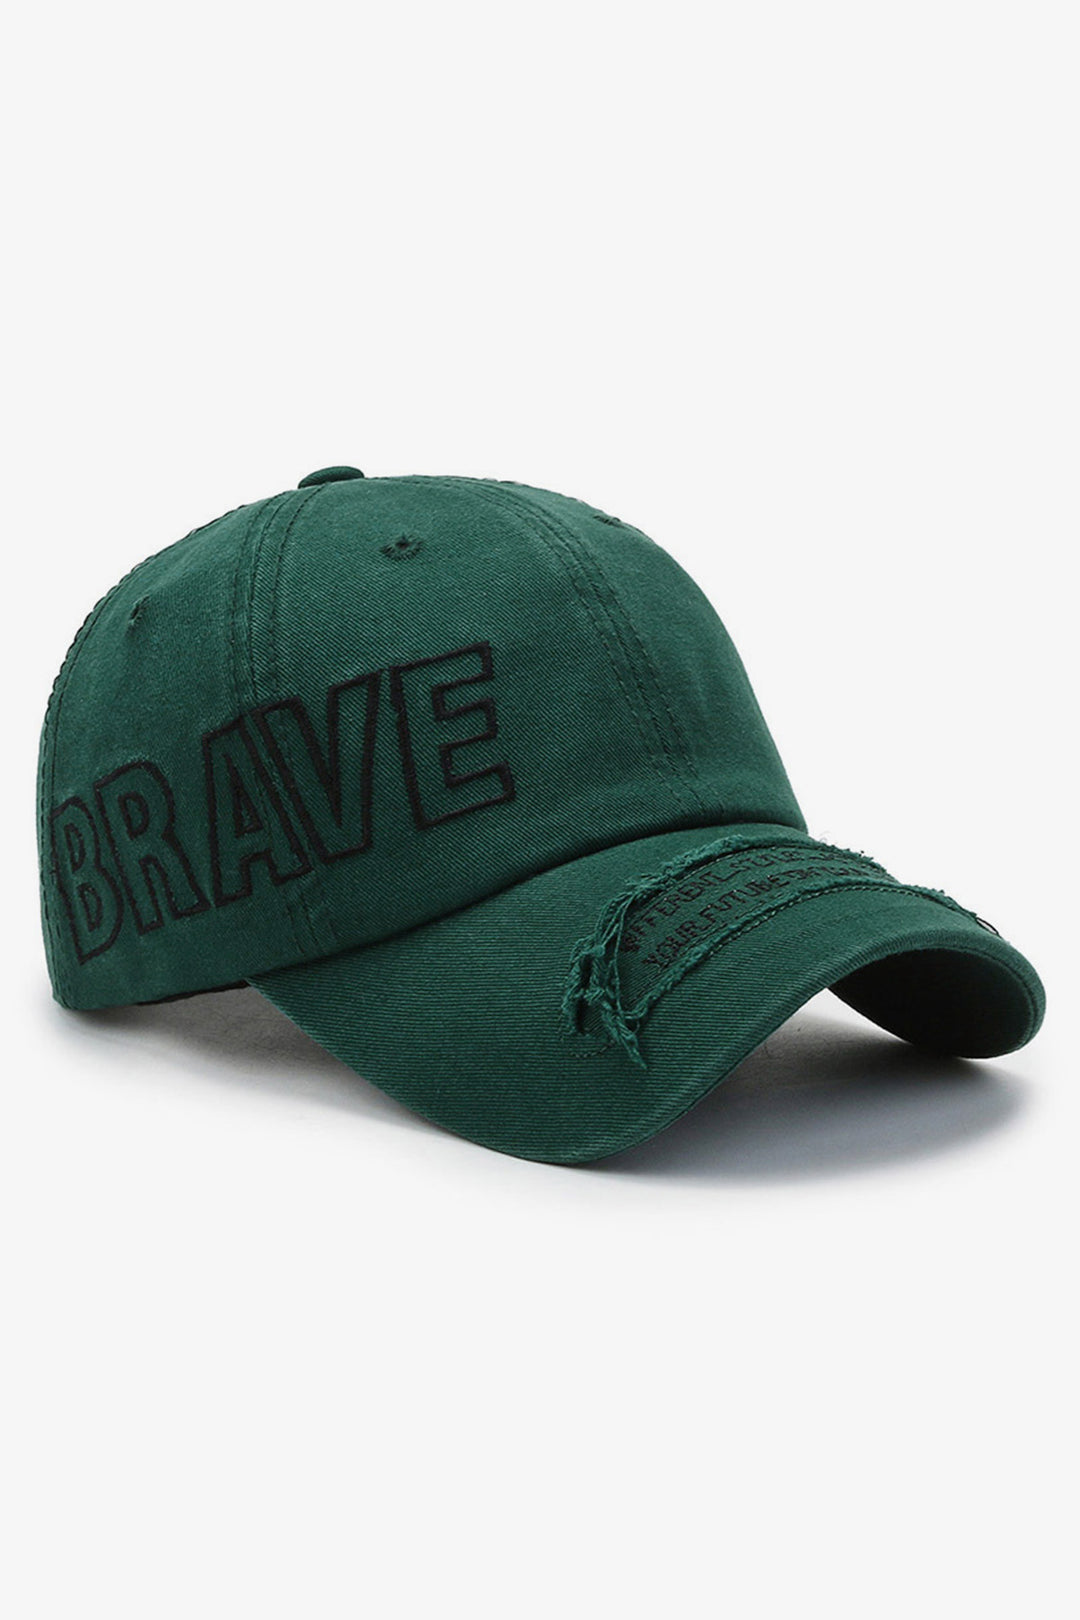 Teal "Brave" Embroidered Cap - S23 - MCP111R